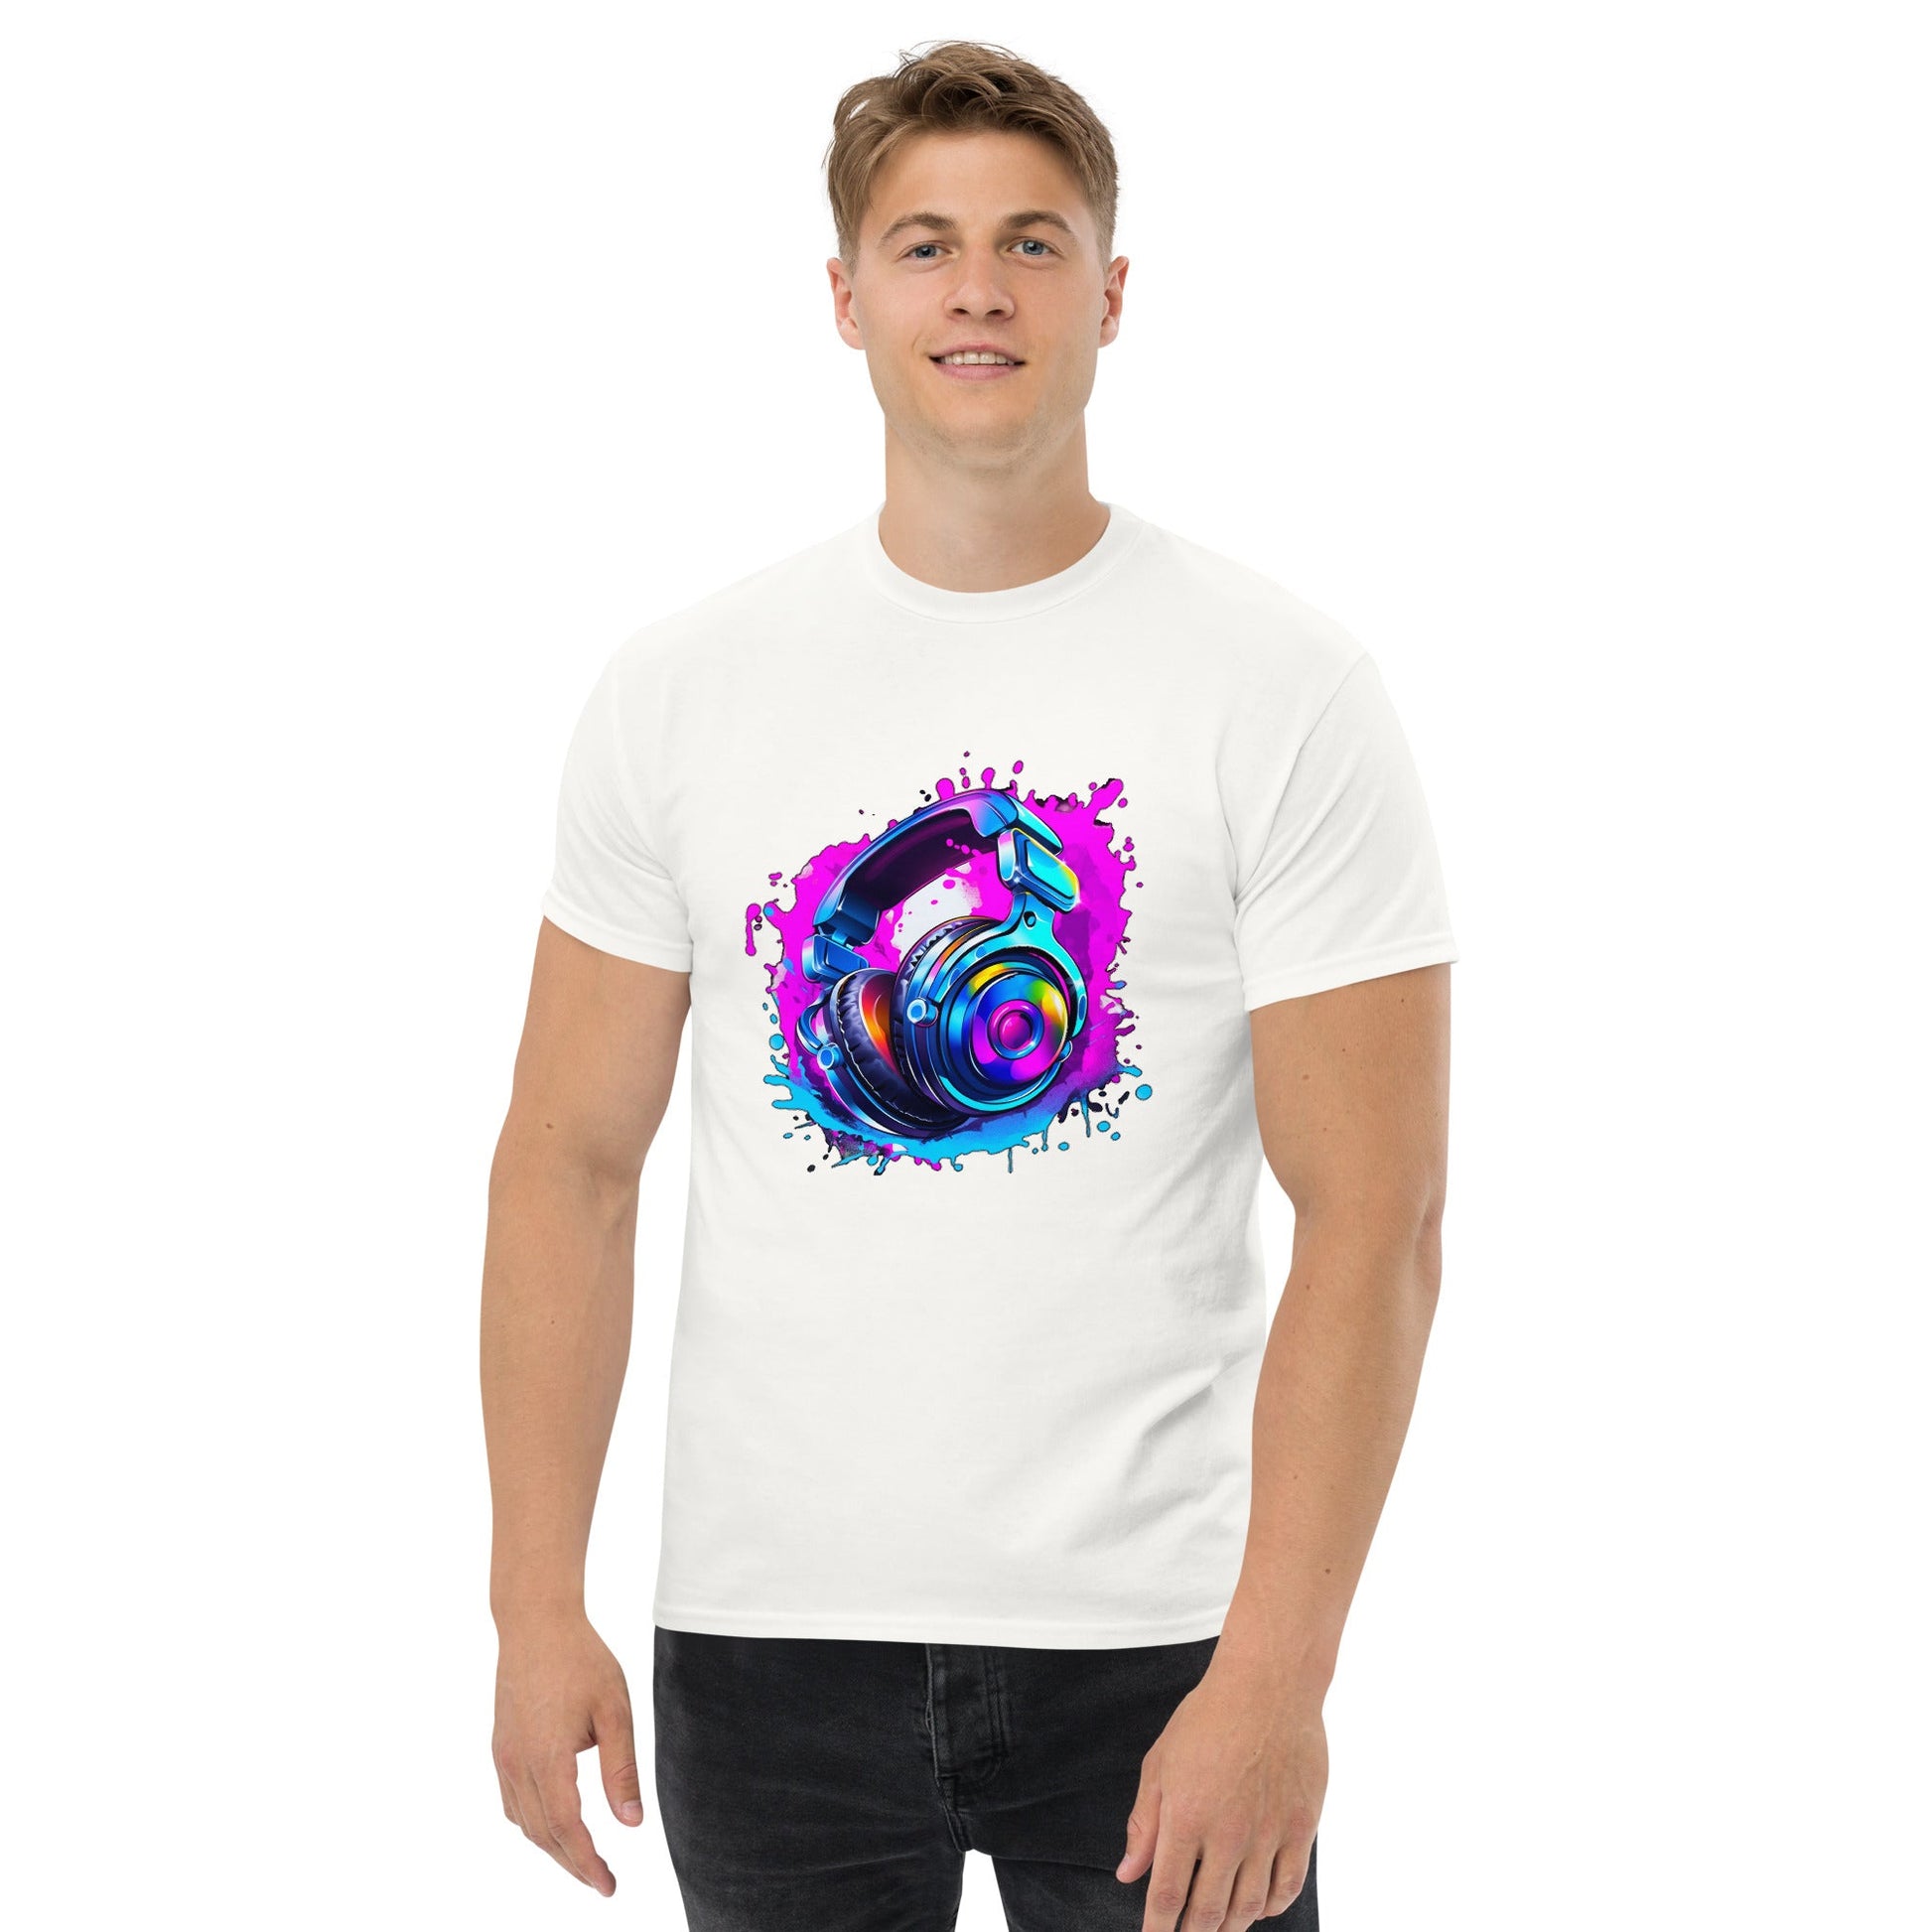 Headphones T - Shirt Clubbing Party Night Out MensT - ShirtGalactrip CoutureHeadphones T - Shirt Clubbing Party Night Out Mens